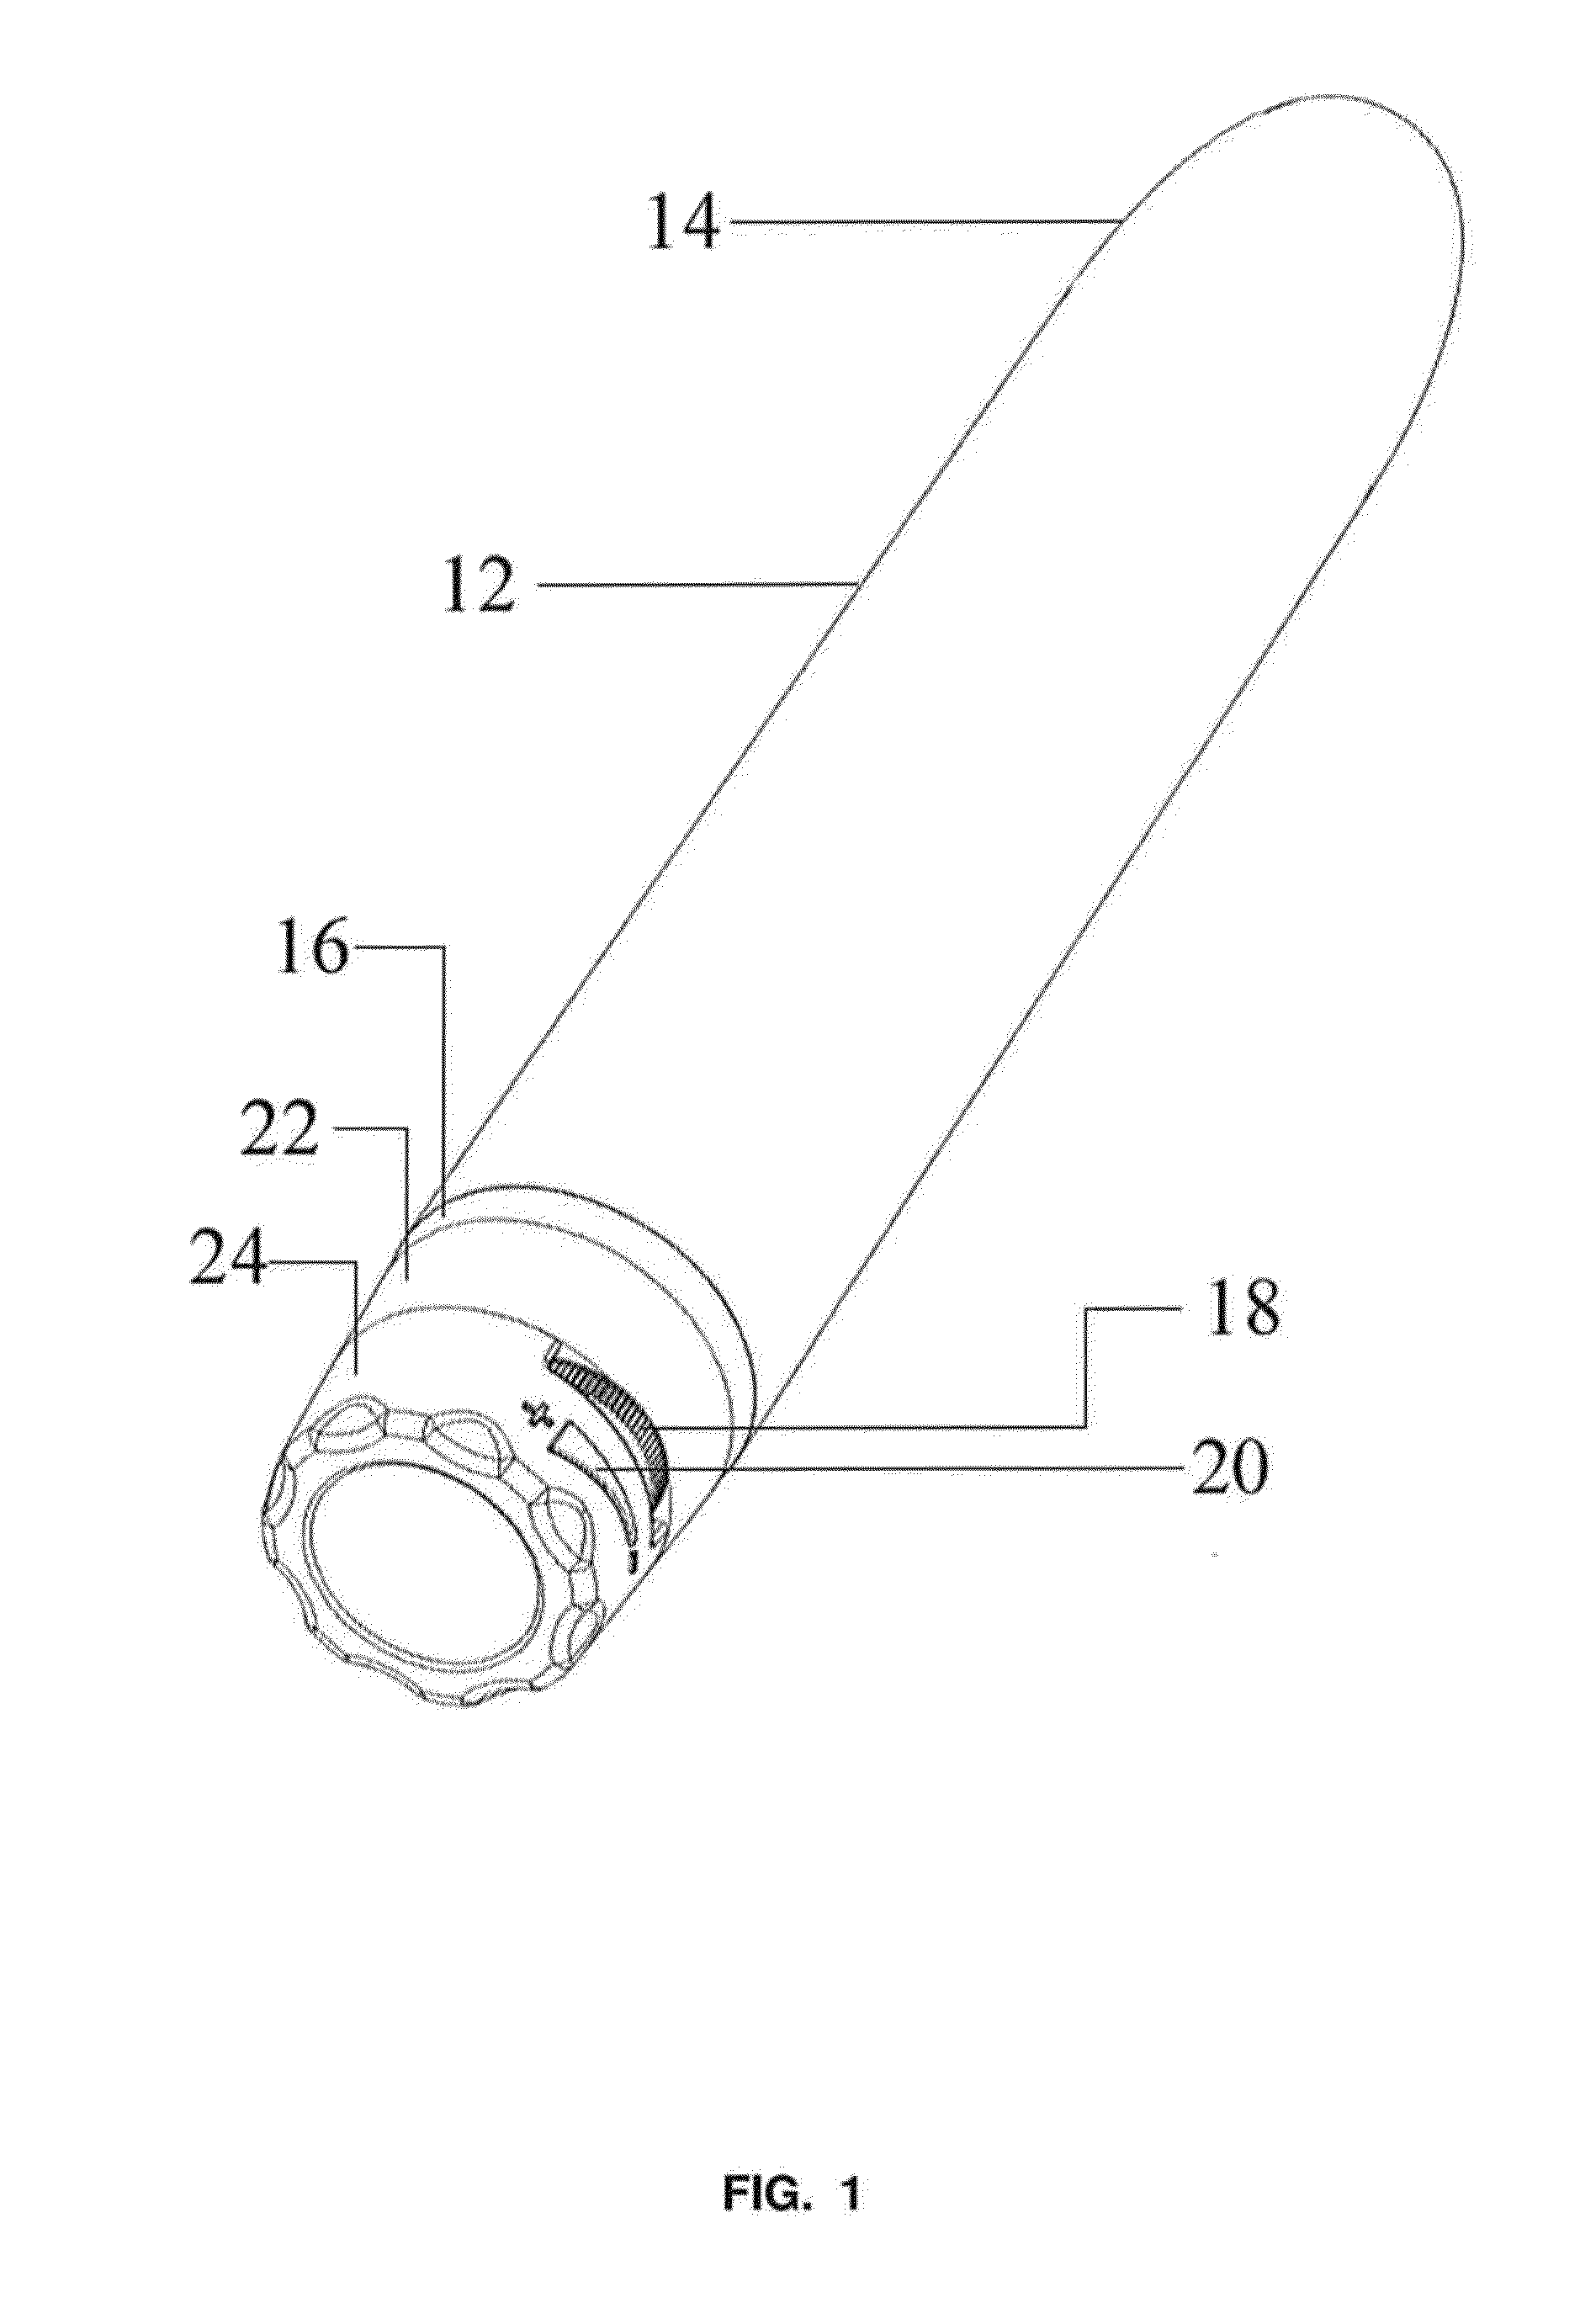 Vaginal tissue regeneration device and method for regeneration of vaginal lining using vibration therapy